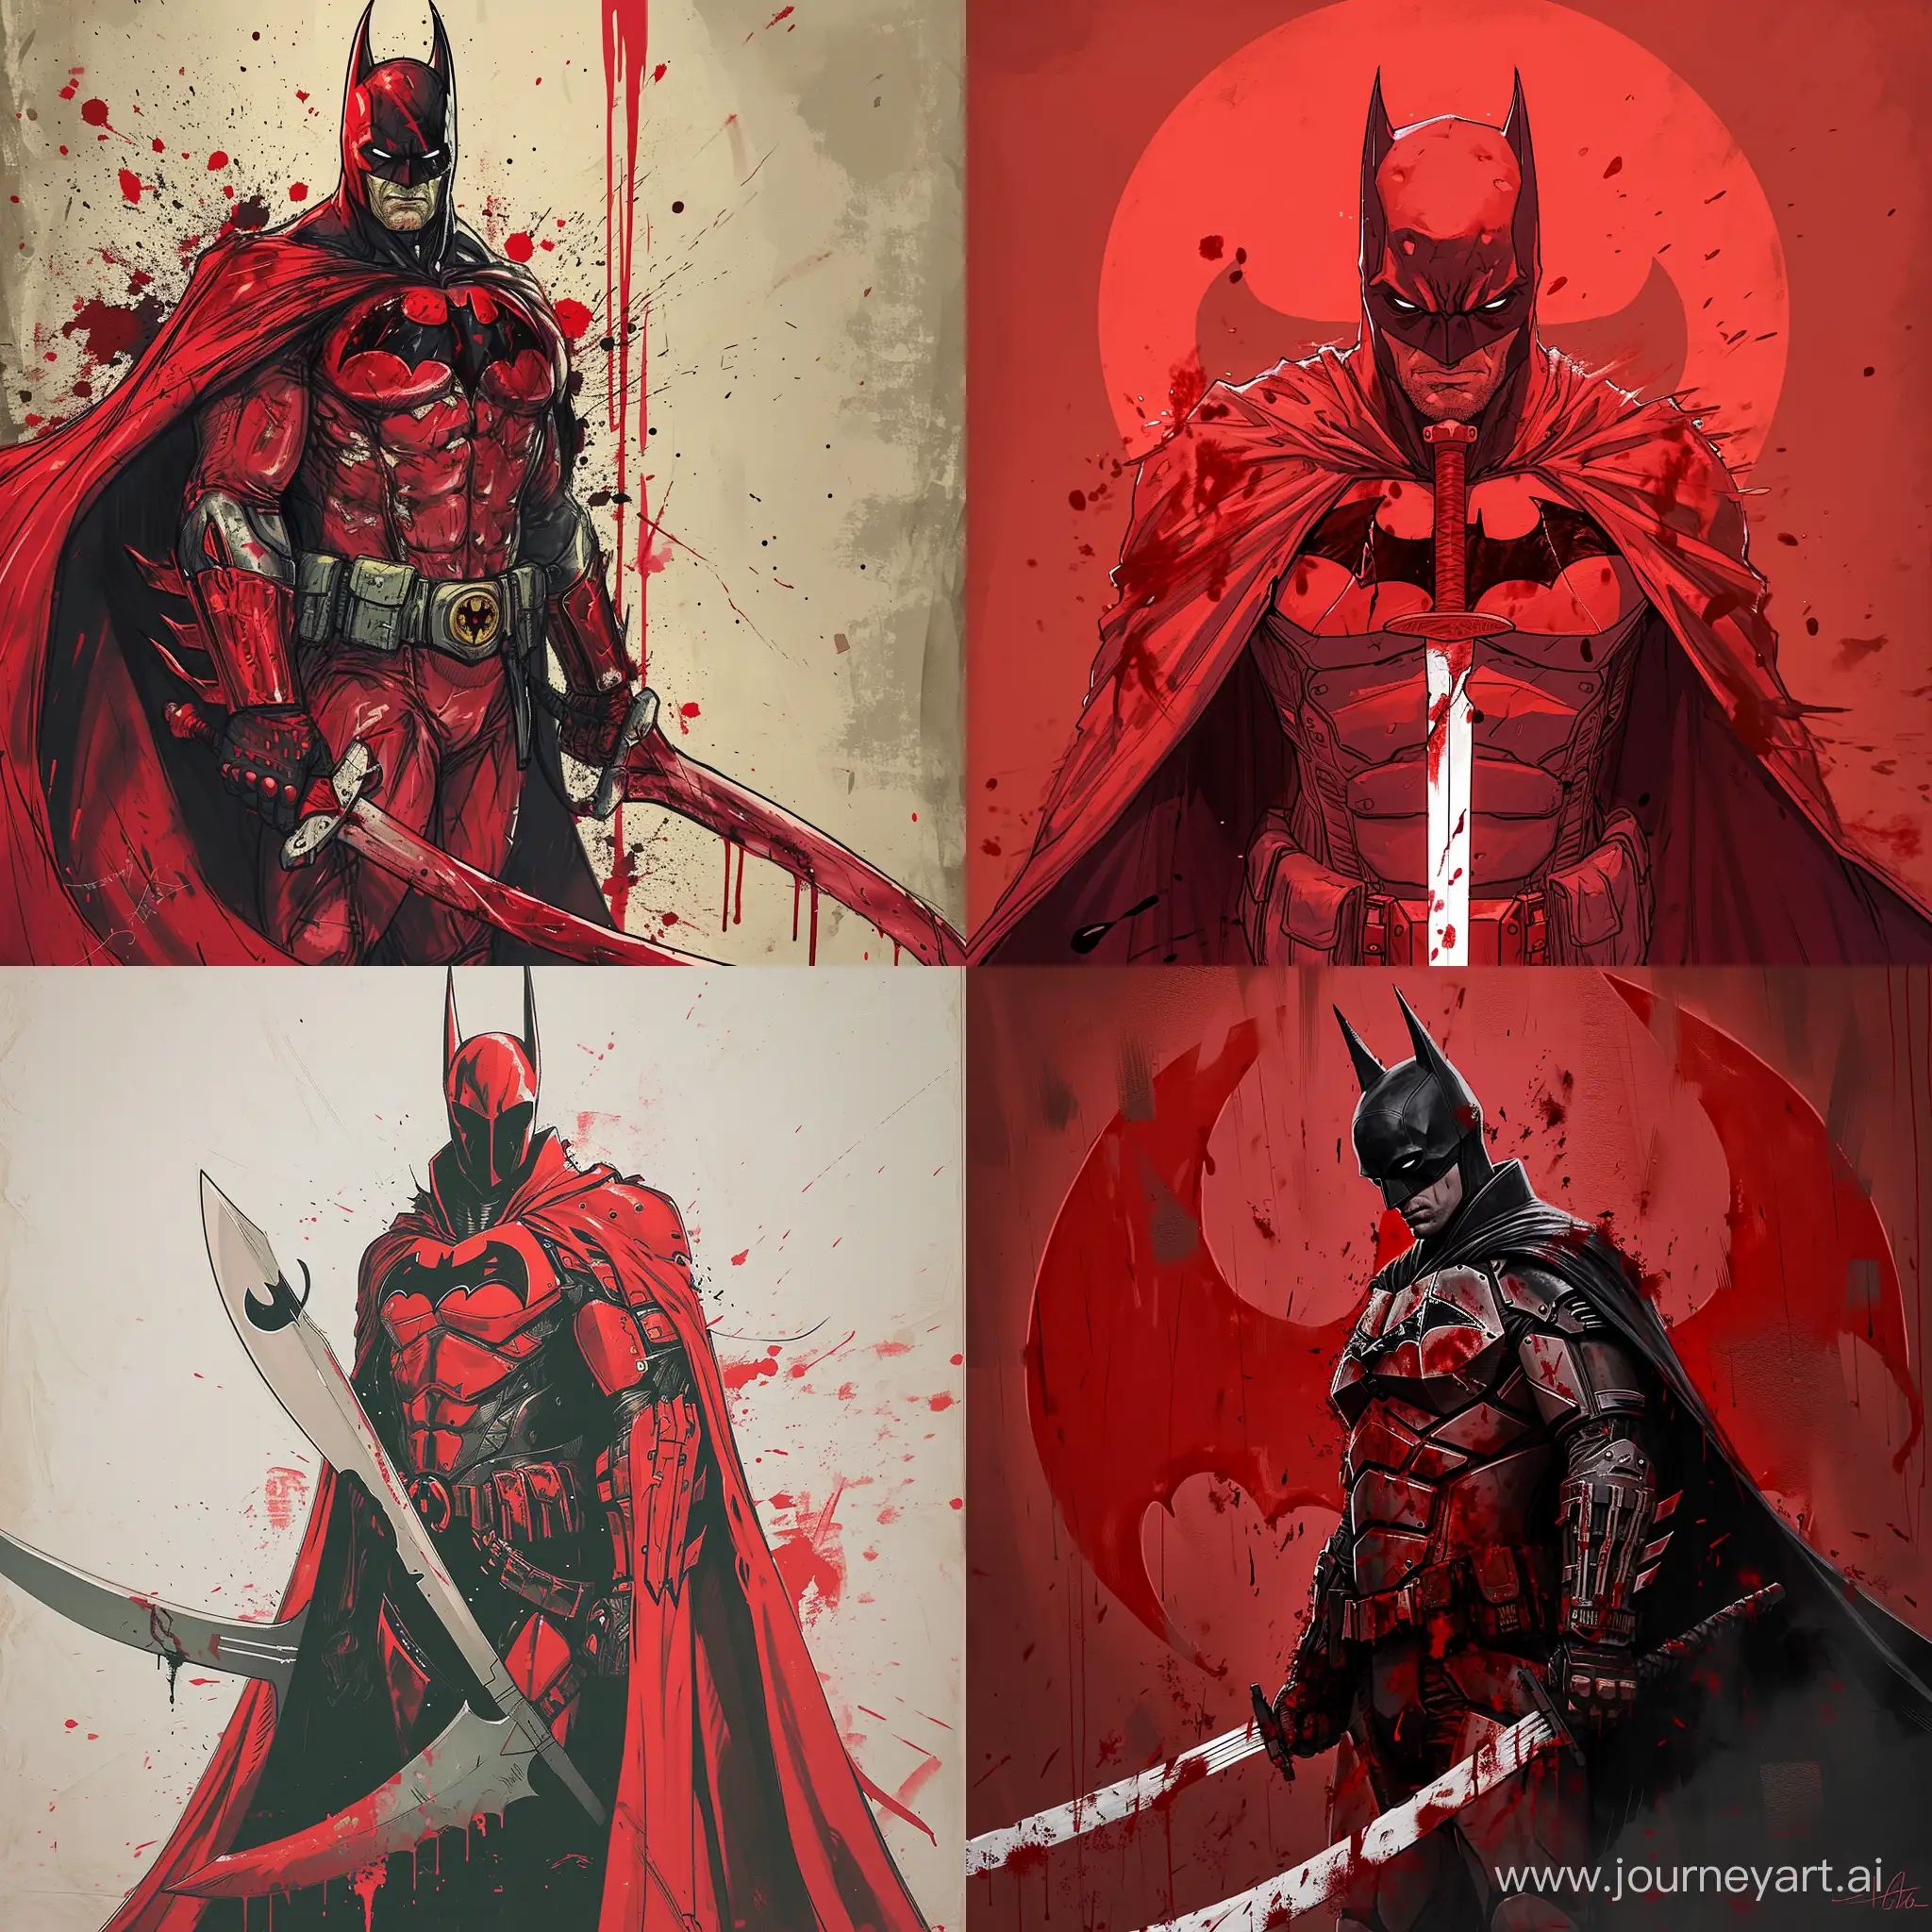 draw a blood red batman  with sword and instead of a bat symbol it has half moon symbol